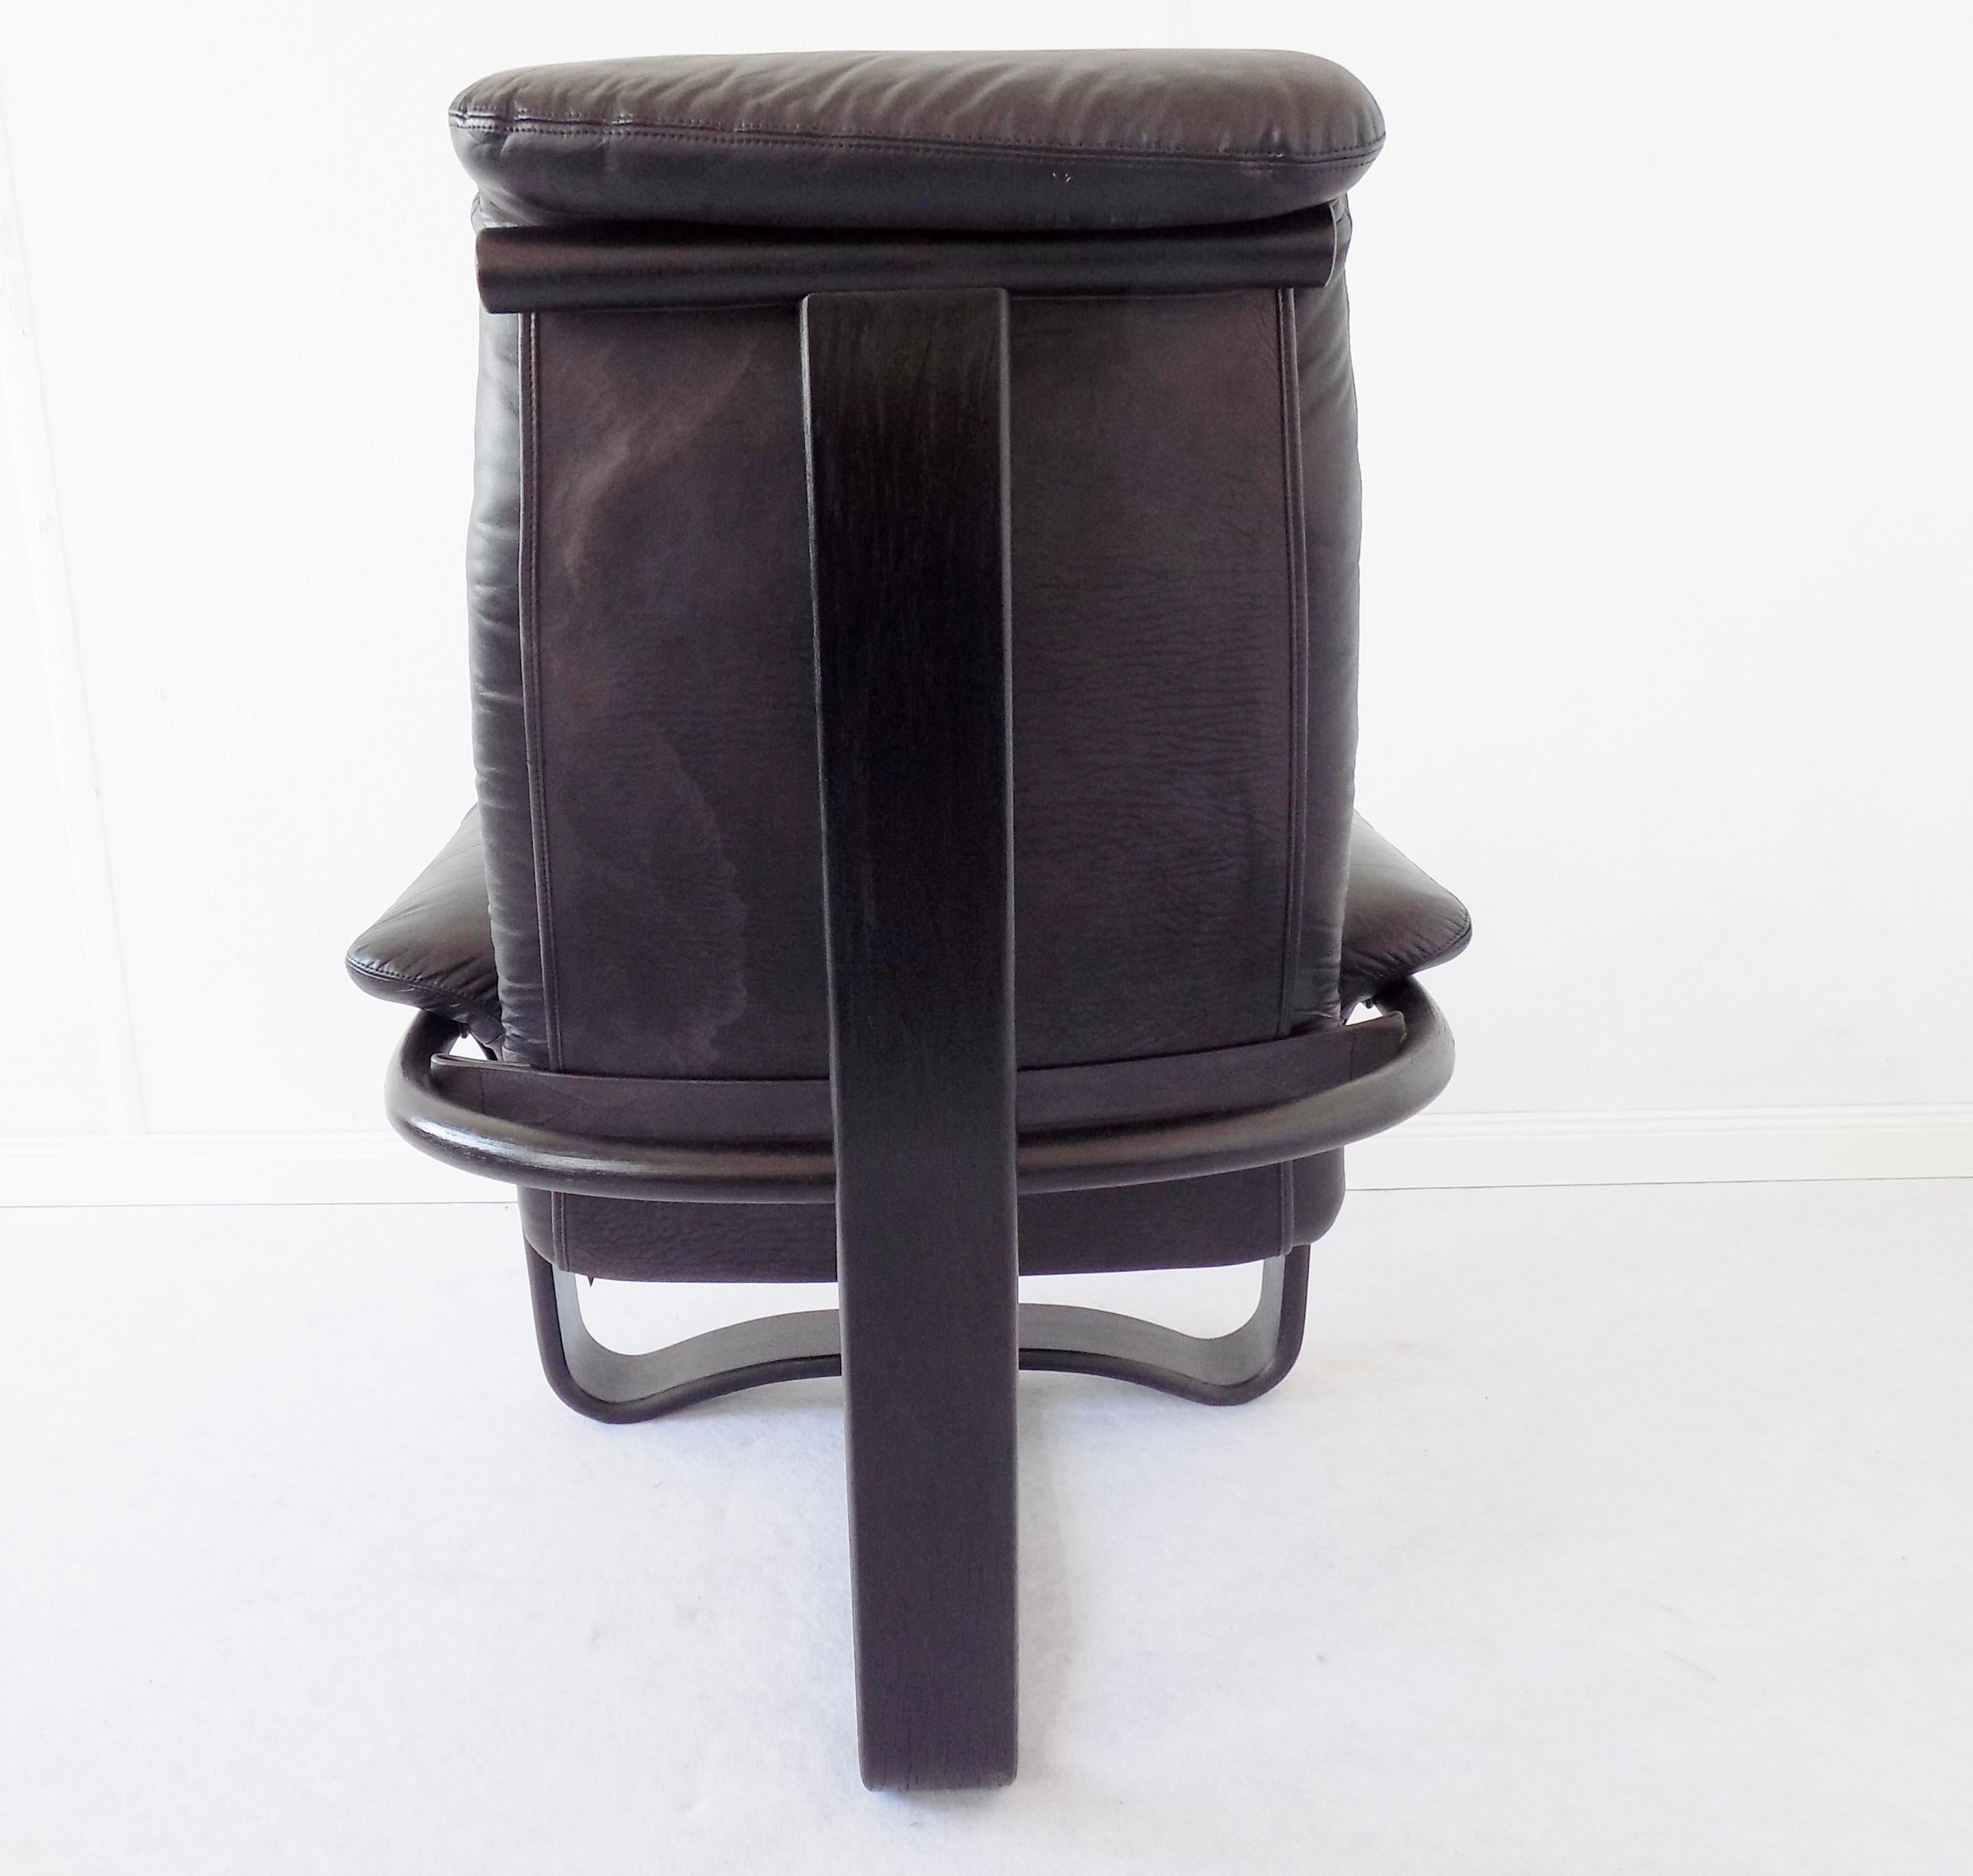 Mid-20th Century Manta Chair by Ingmar Relling for Westnofa, Black Leather, Scandinavian modern For Sale